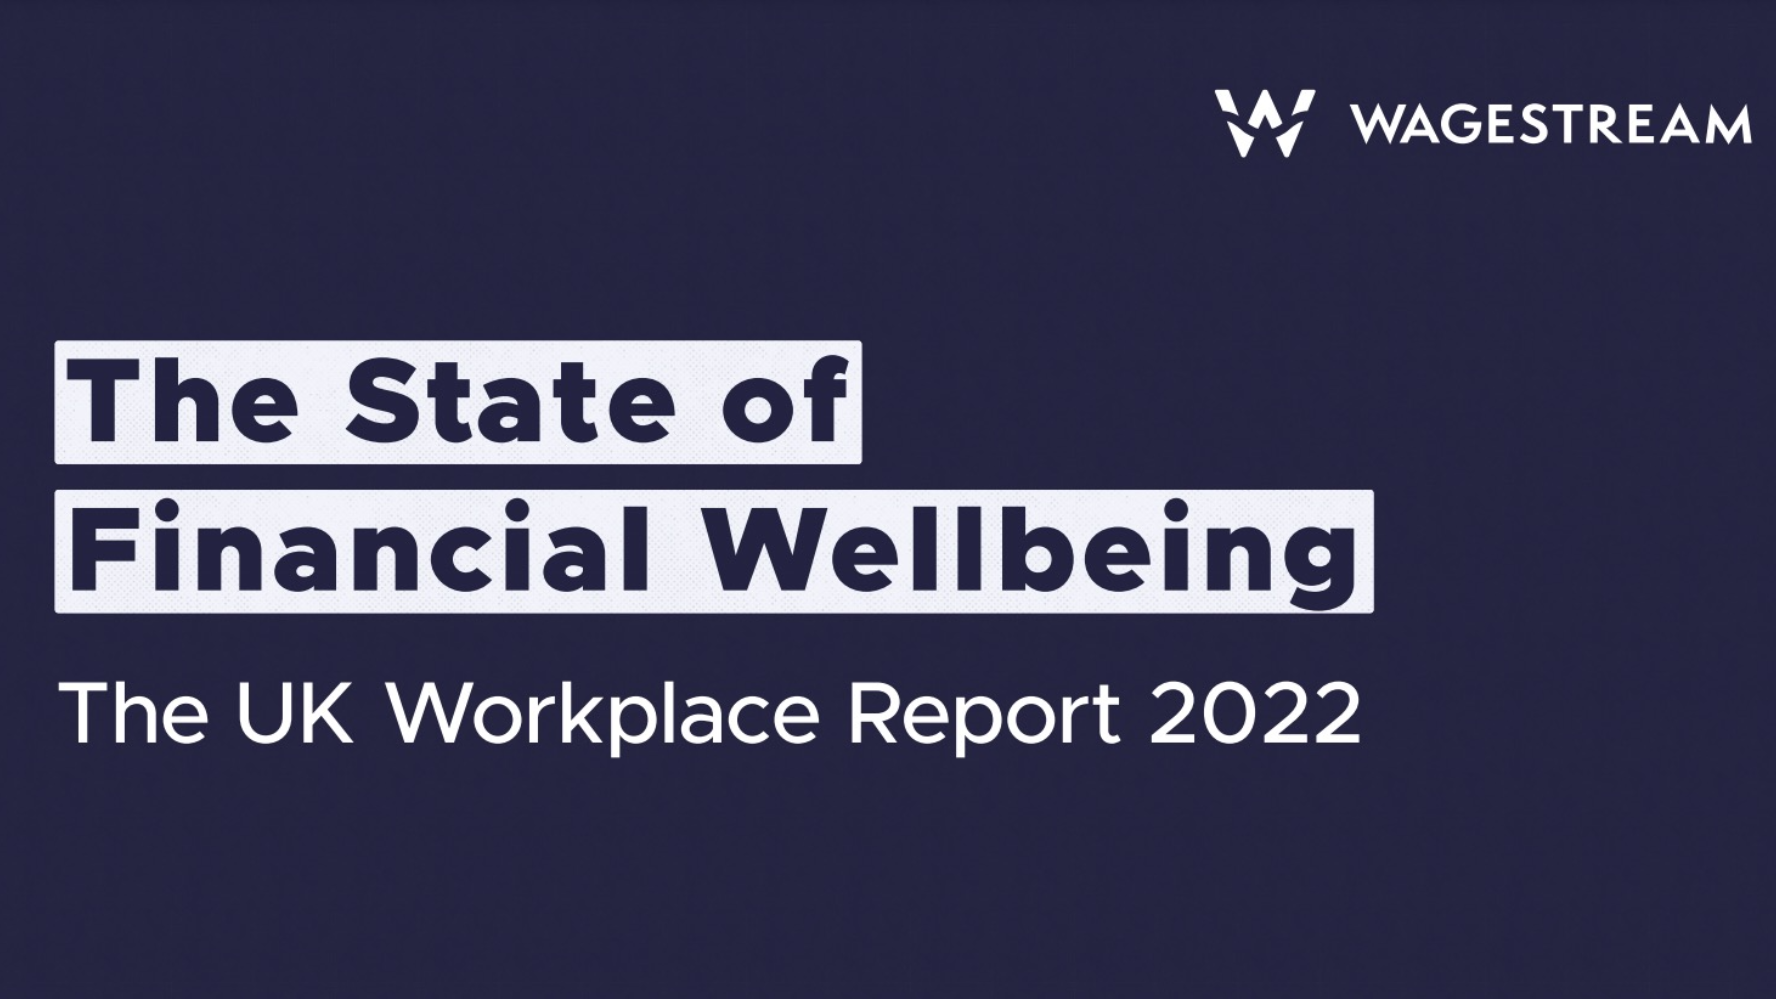 Wagestream. The state of financial wellbeing. the UK workplace report 2022